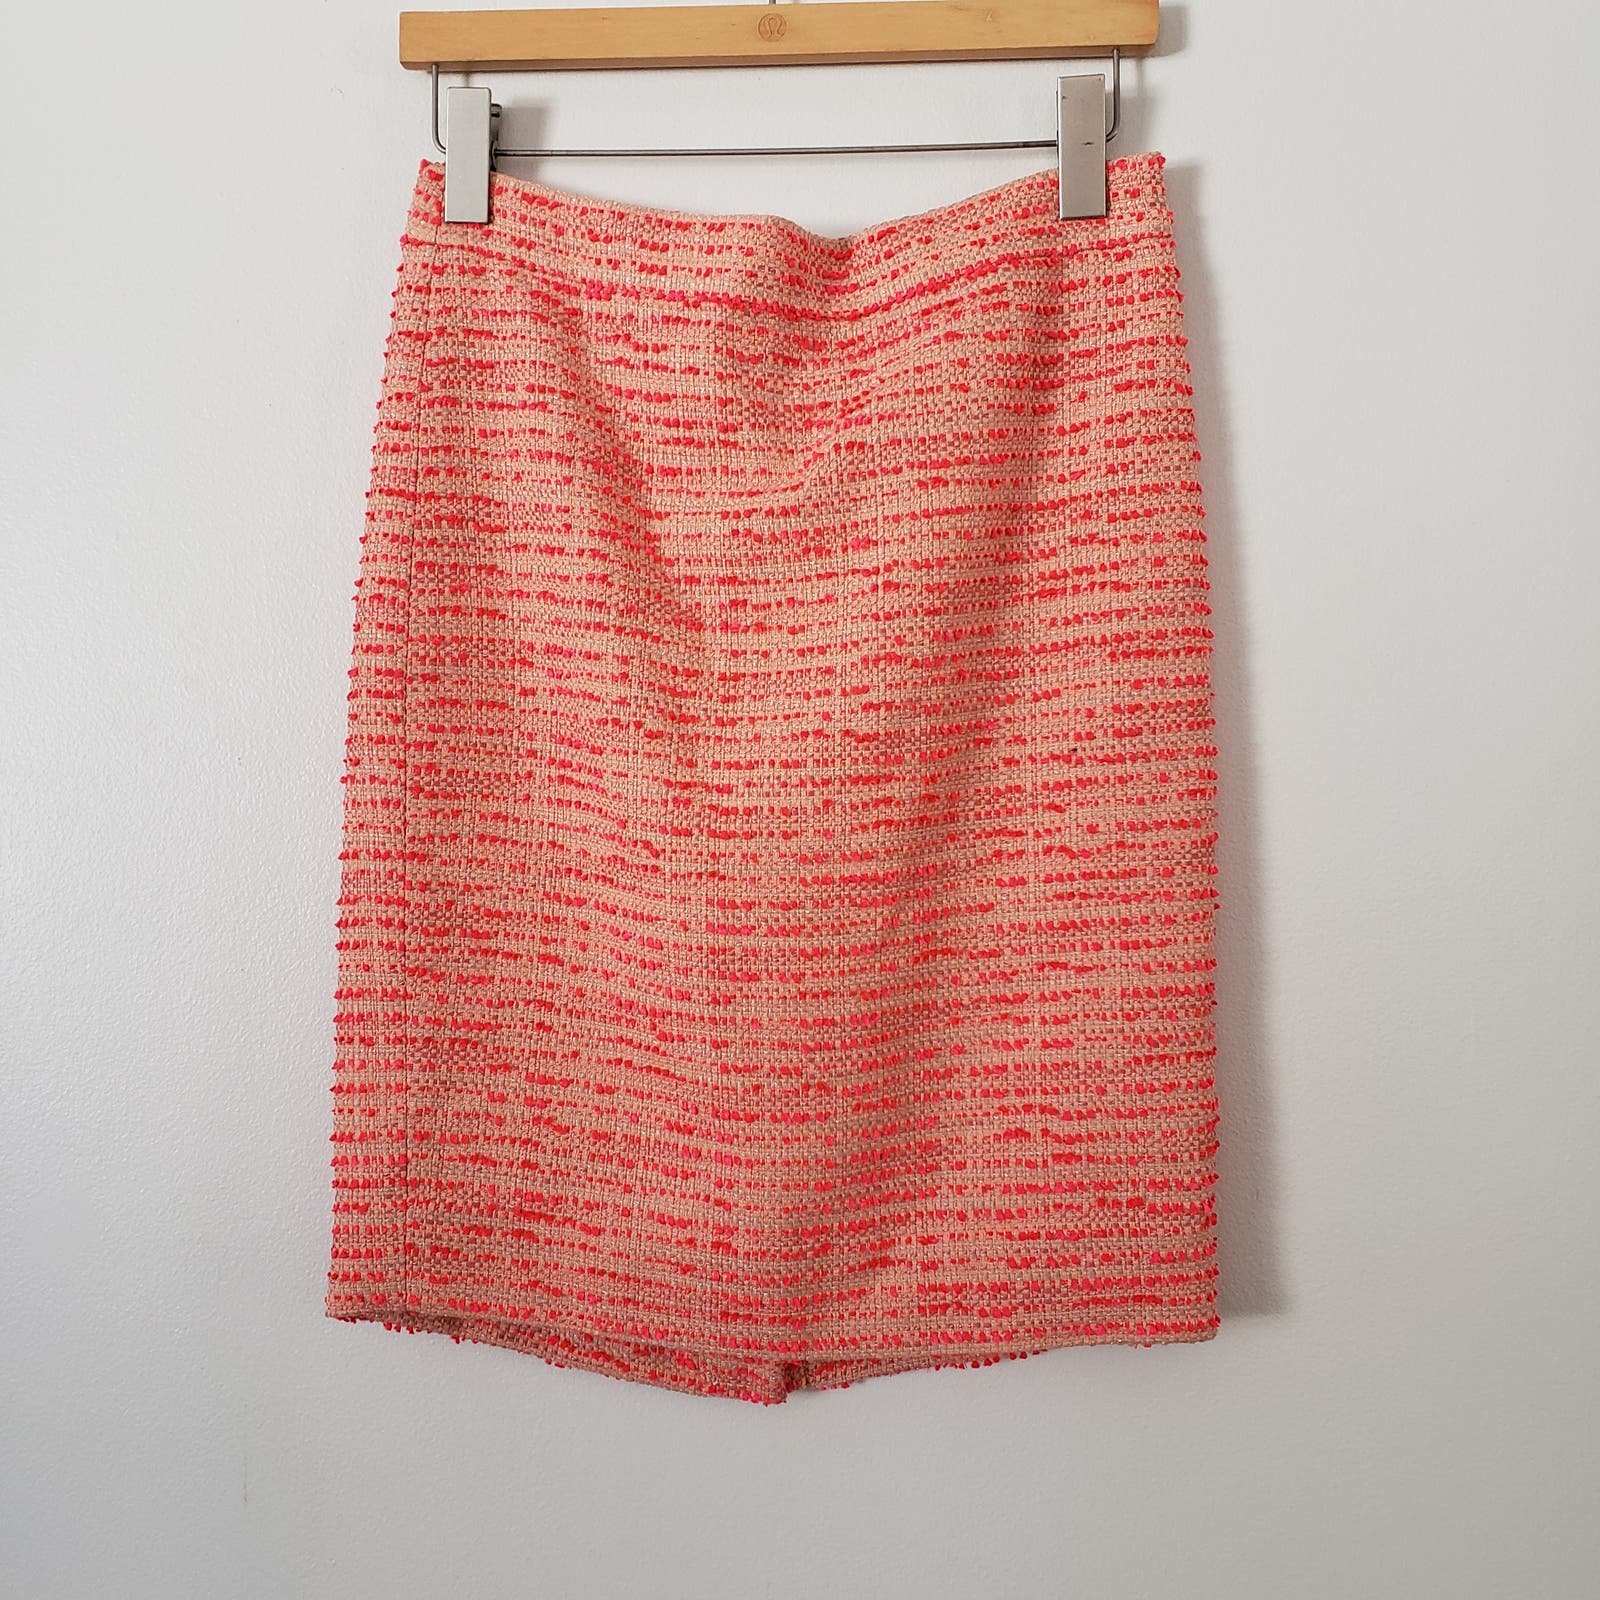 cheapest place to buy  New J. Crew The Pencil Skirt Neo